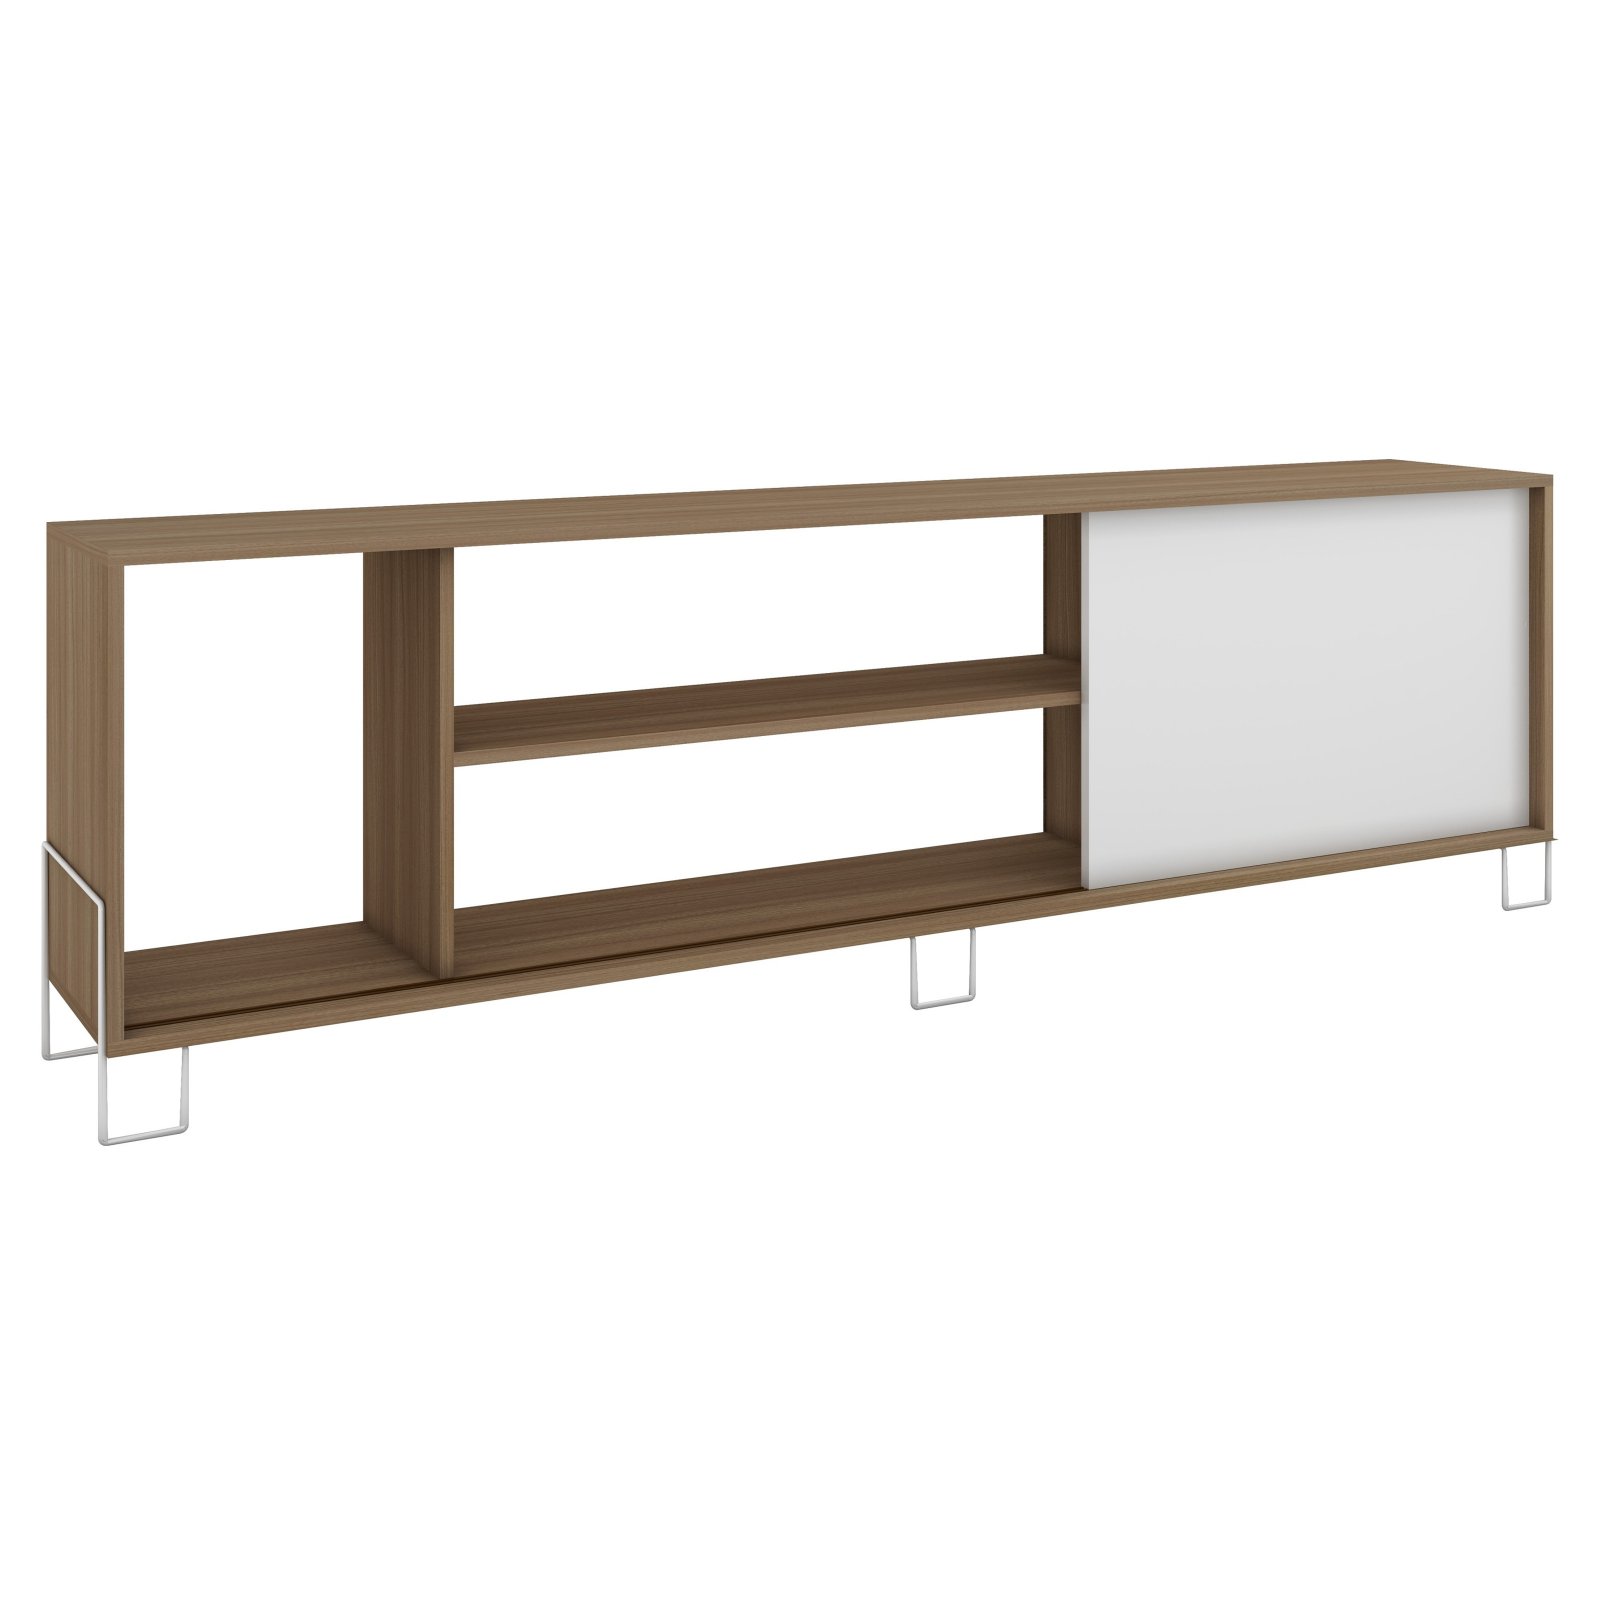 Nacka TV Stand 2.0 with 4 shelves in Oak and White - image 1 of 10